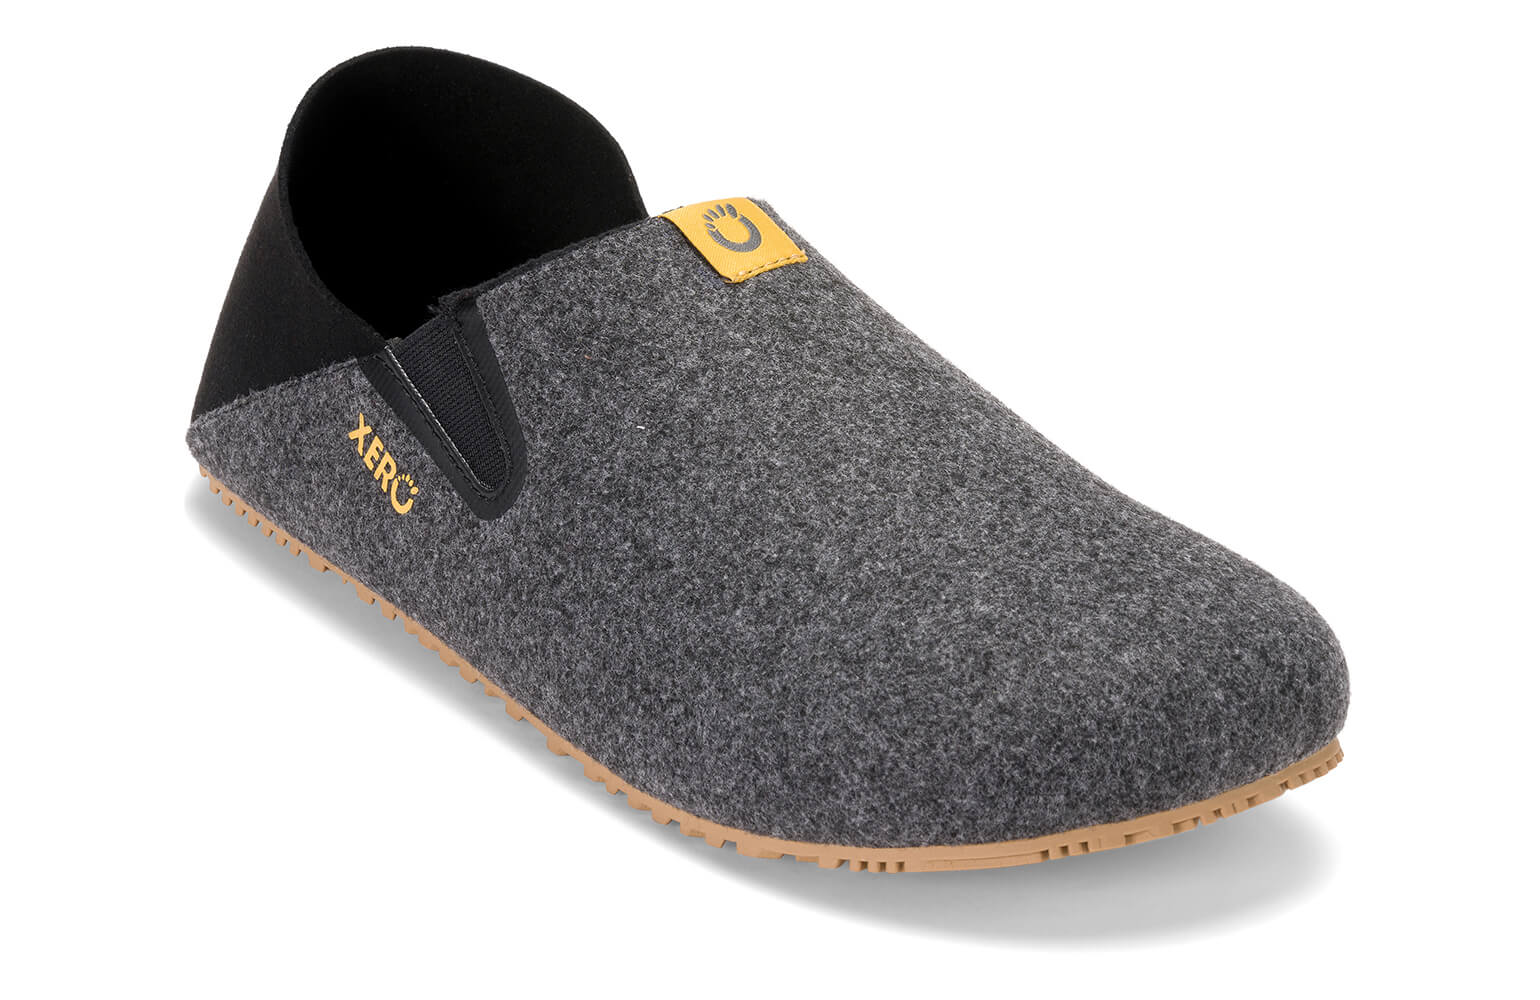 The Ultimate Slip-On, cont